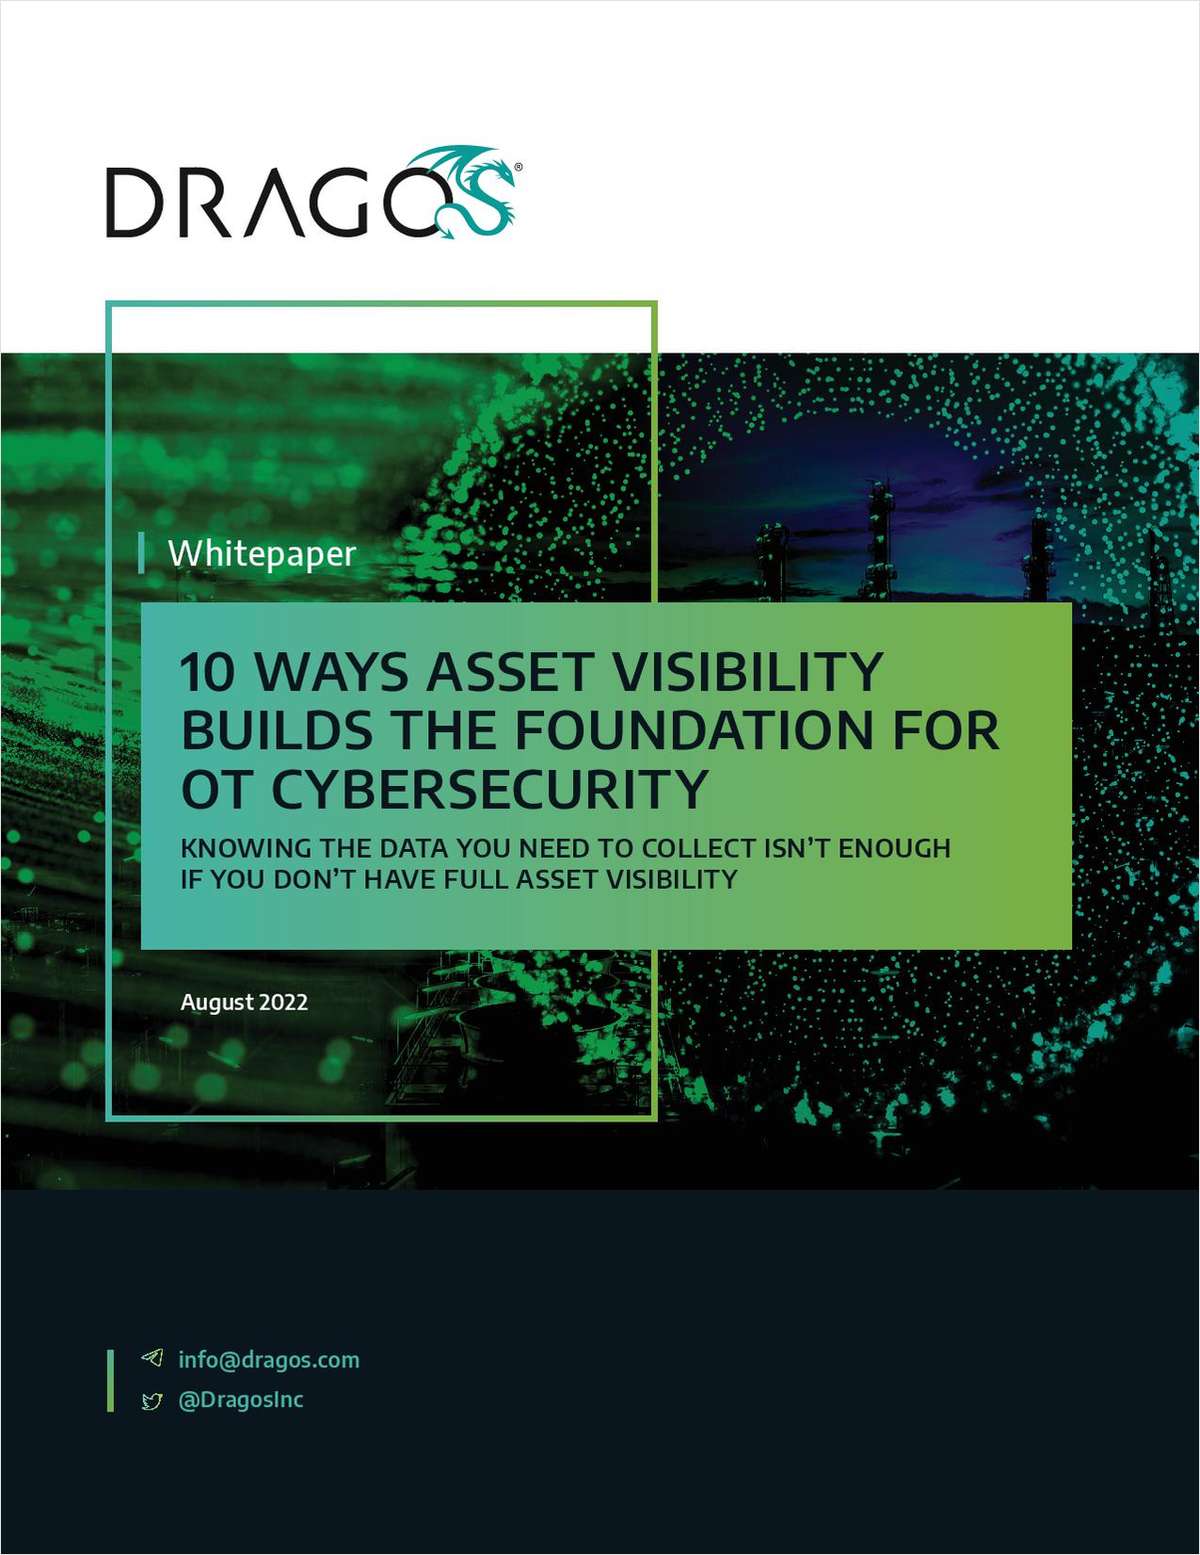 10 Ways Asset Visibility Build the Foundation for OT Cybersecurity